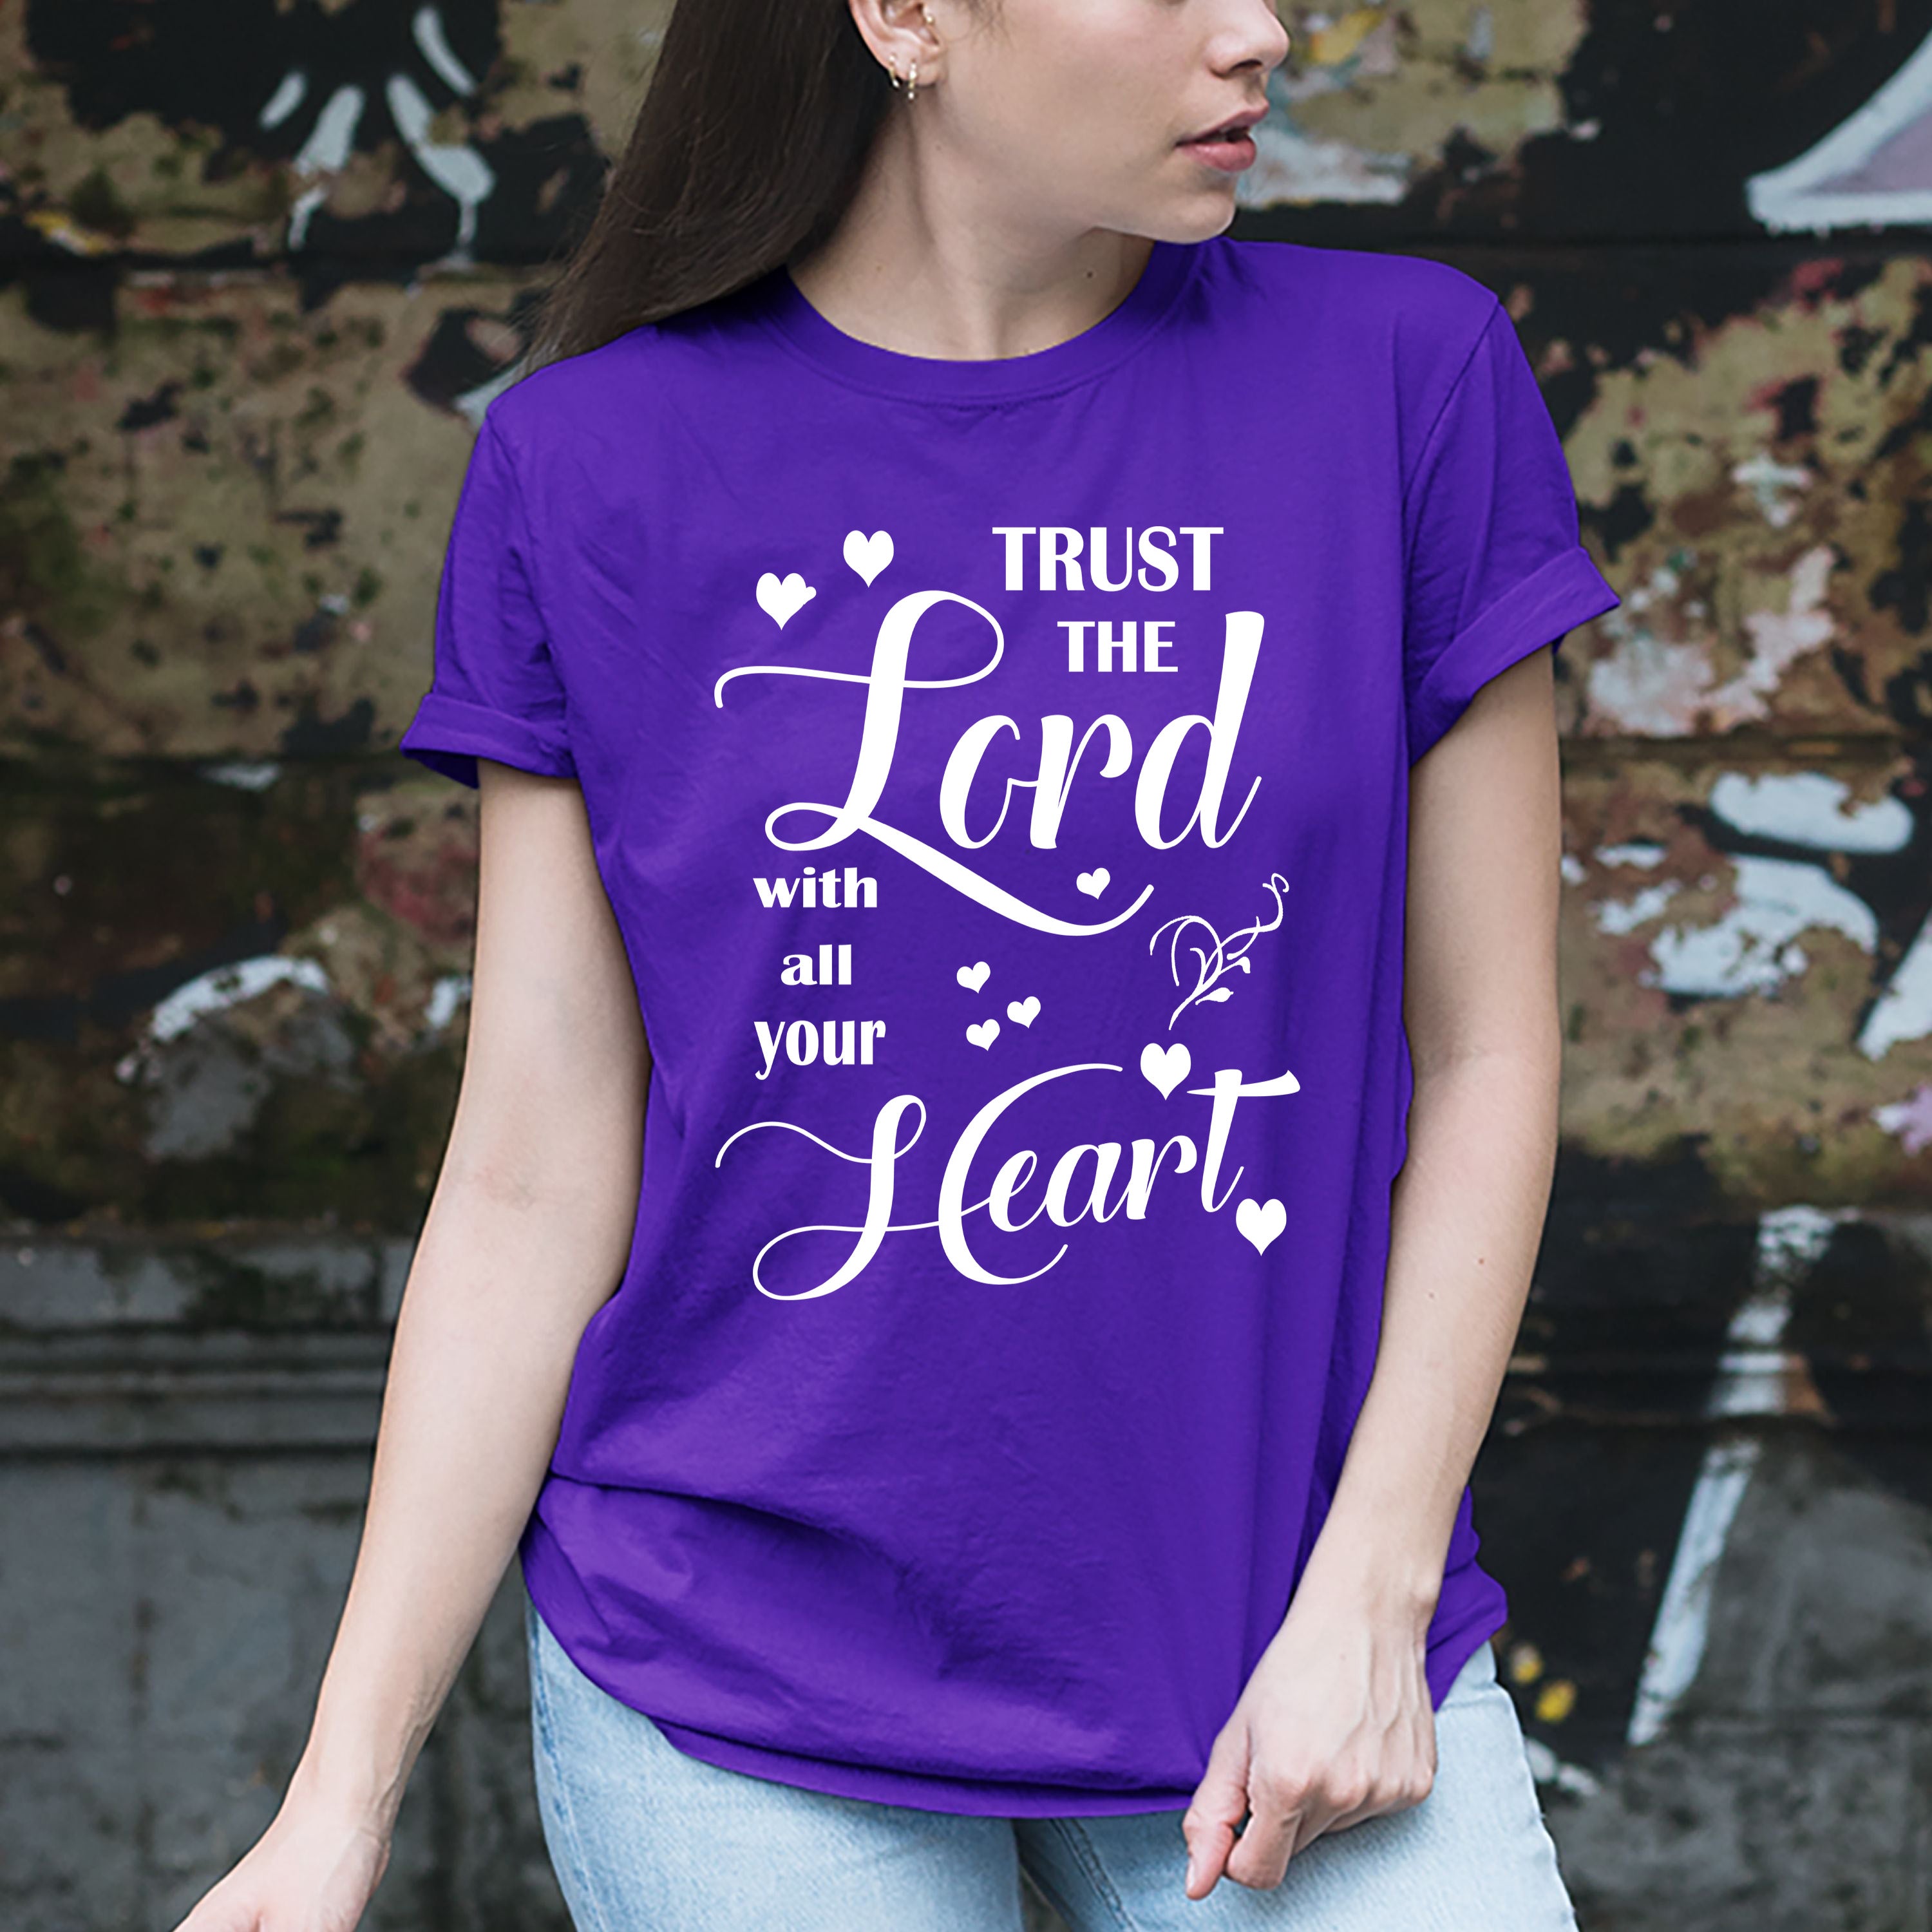 "TRUST THE LORD WITH ALL YOUR HEART" Jesus